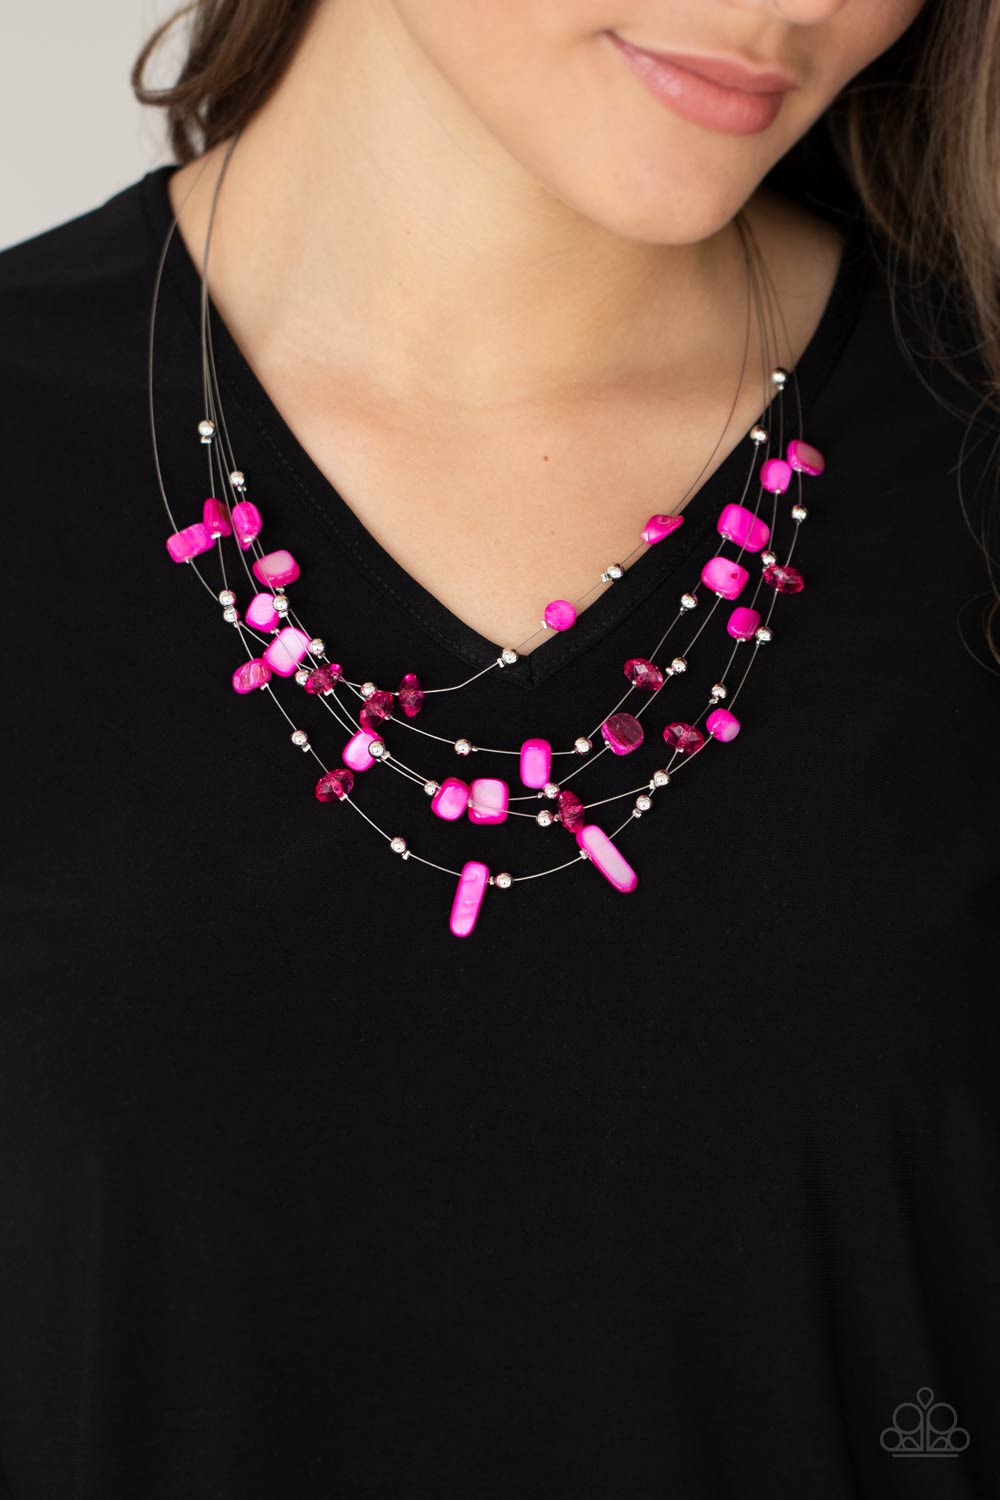 Prismatic Pebbles Pink Necklace - Paparazzi Accessories  Dainty silver beads, pink crystal-like beads, and shell-like pink pebbles are fitted in place along strands of dainty wires, creating colorful layers below the collar. Features an adjustable clasp closure.  All Paparazzi Accessories are lead free and nickel free!  Sold as one individual necklace. Includes one pair of matching earrings.